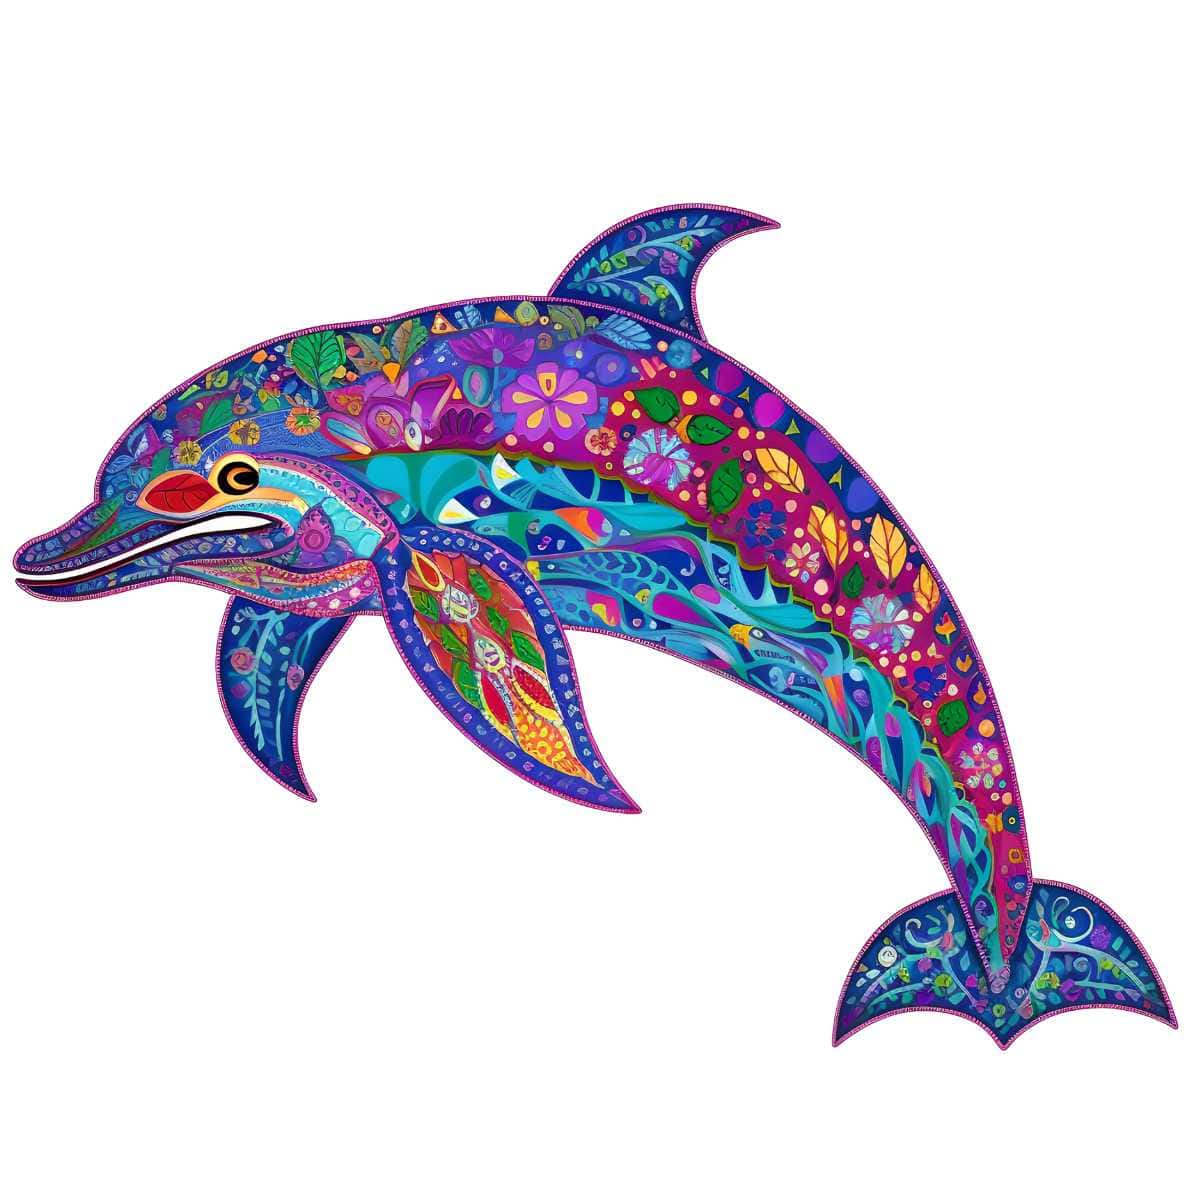 Animal Jigsaw Puzzle > Wooden Jigsaw Puzzle > Jigsaw Puzzle A5 Dolfin - Jigsaw Puzzle